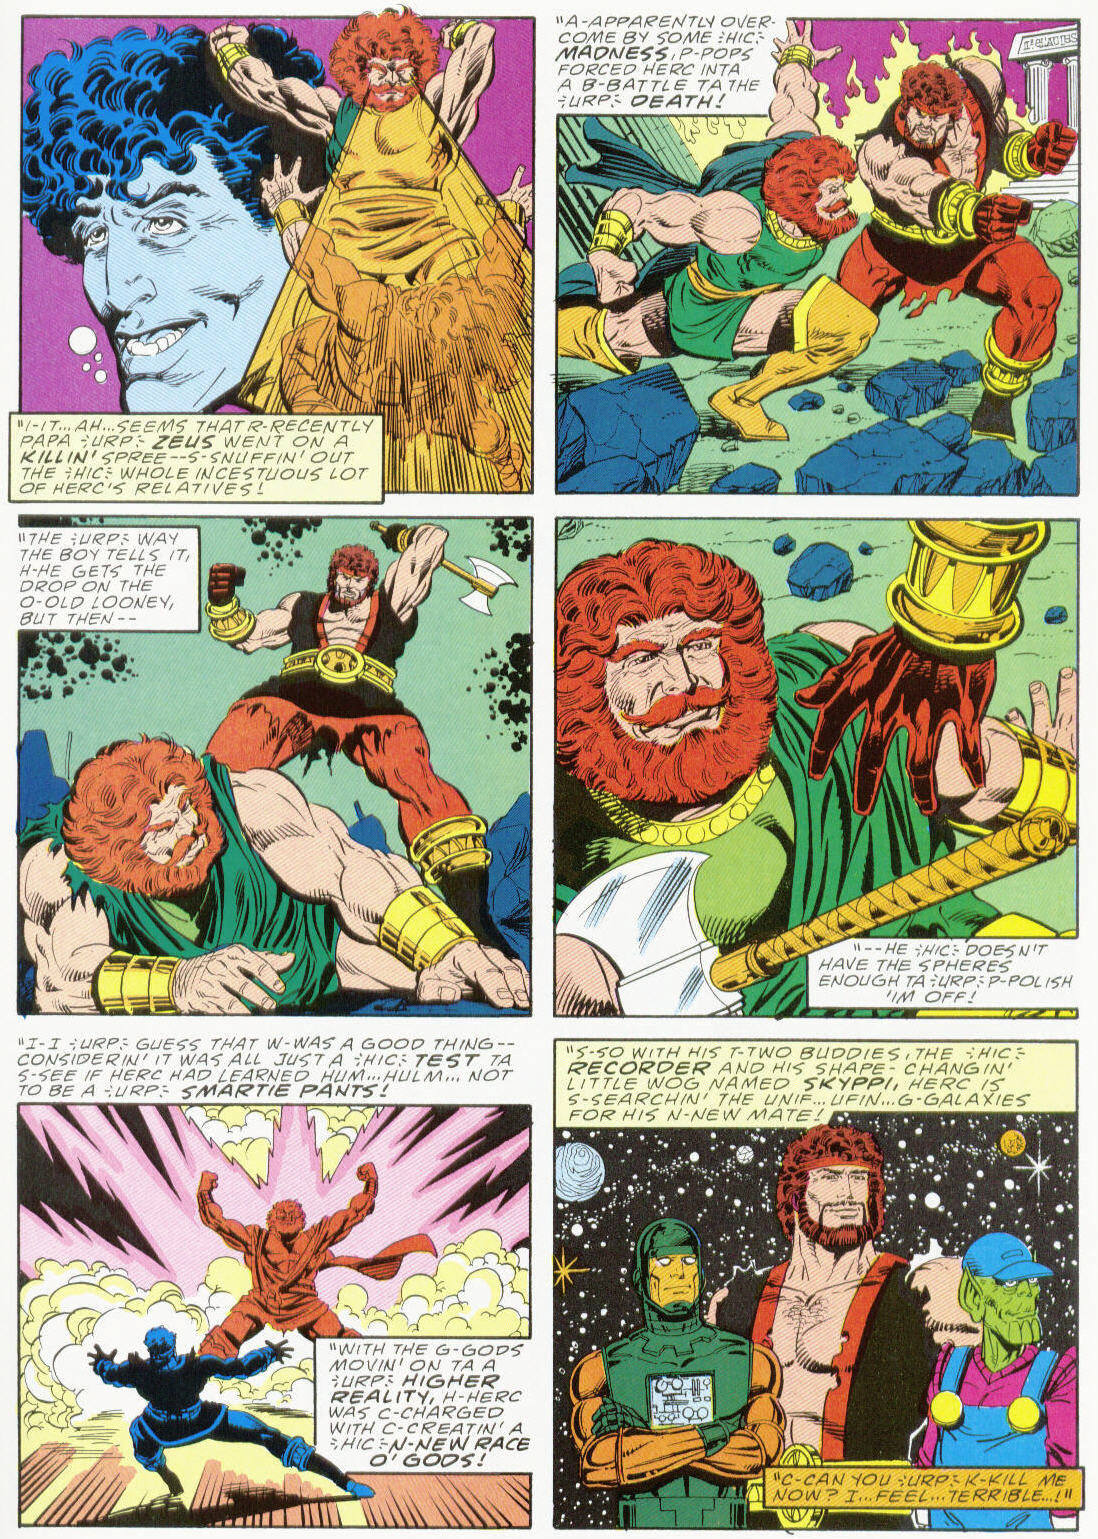 Marvel Graphic Novel issue 37 - Hercules Prince of Power - Full Circle - Page 13